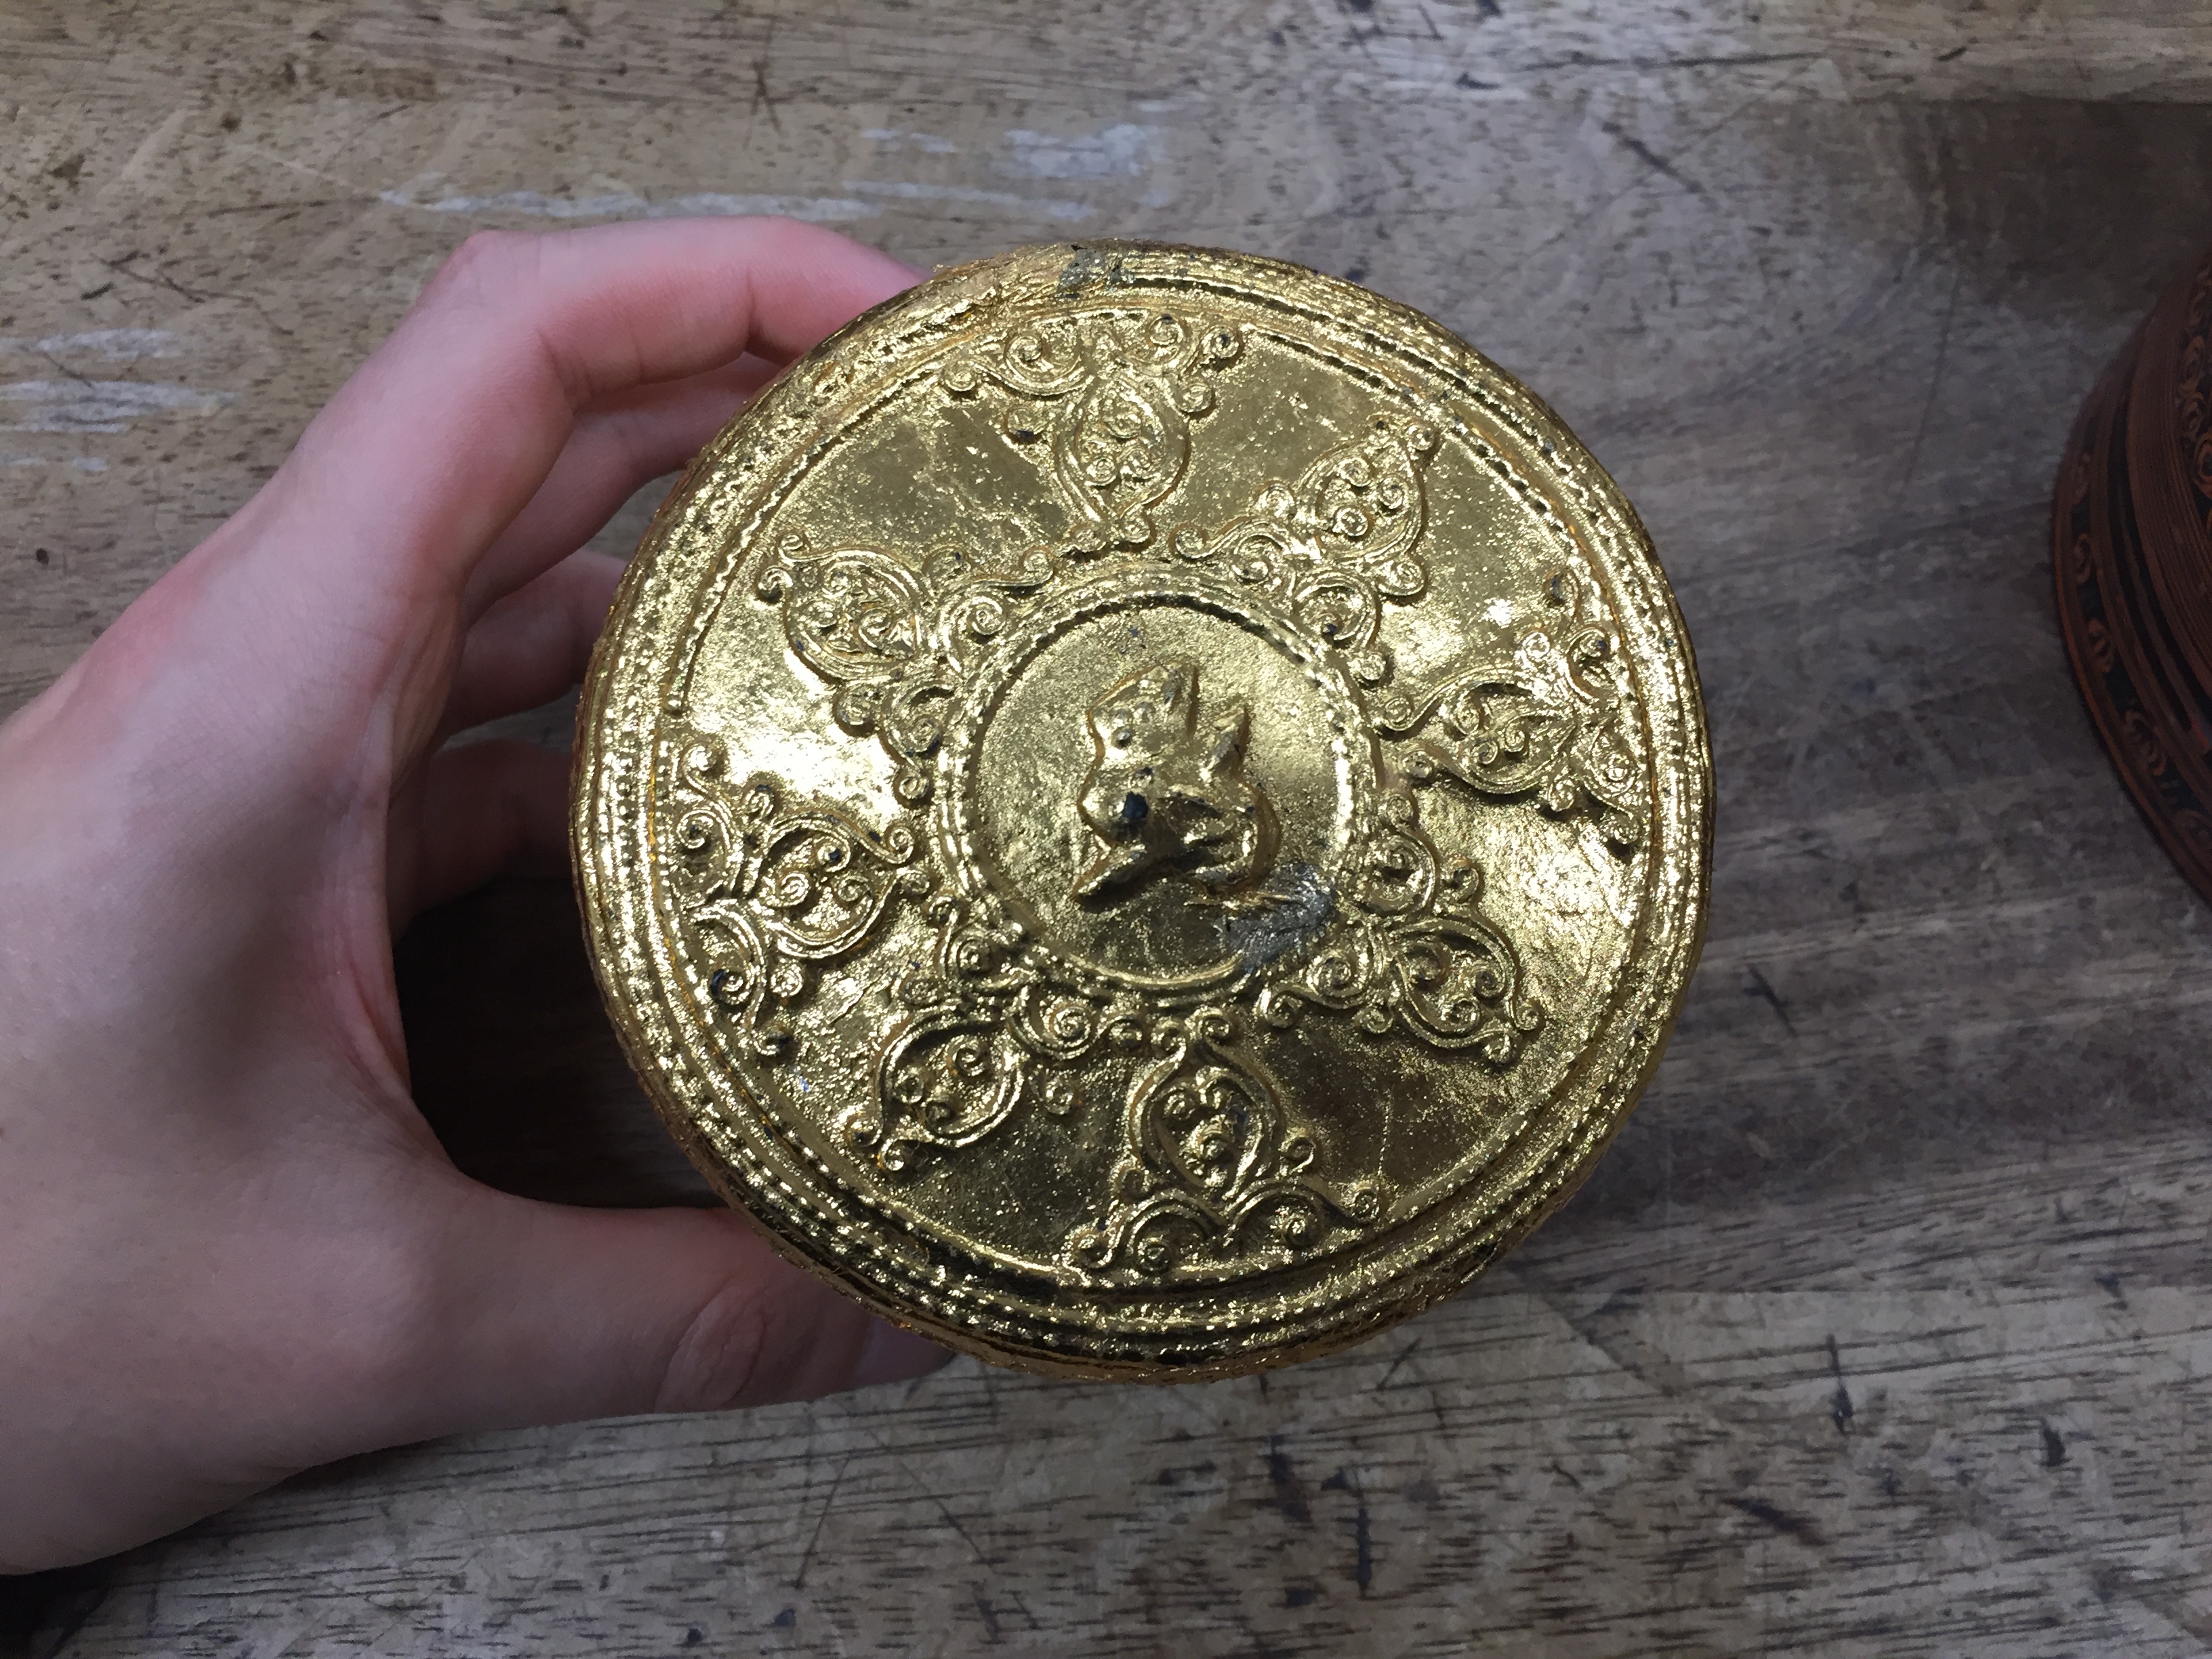 A SMALL BURMESE GILDED LACQUER BOX AND COVER OFFERED ON BEHALF OF PROSPECT BURMA TO BENEFIT - Image 3 of 14